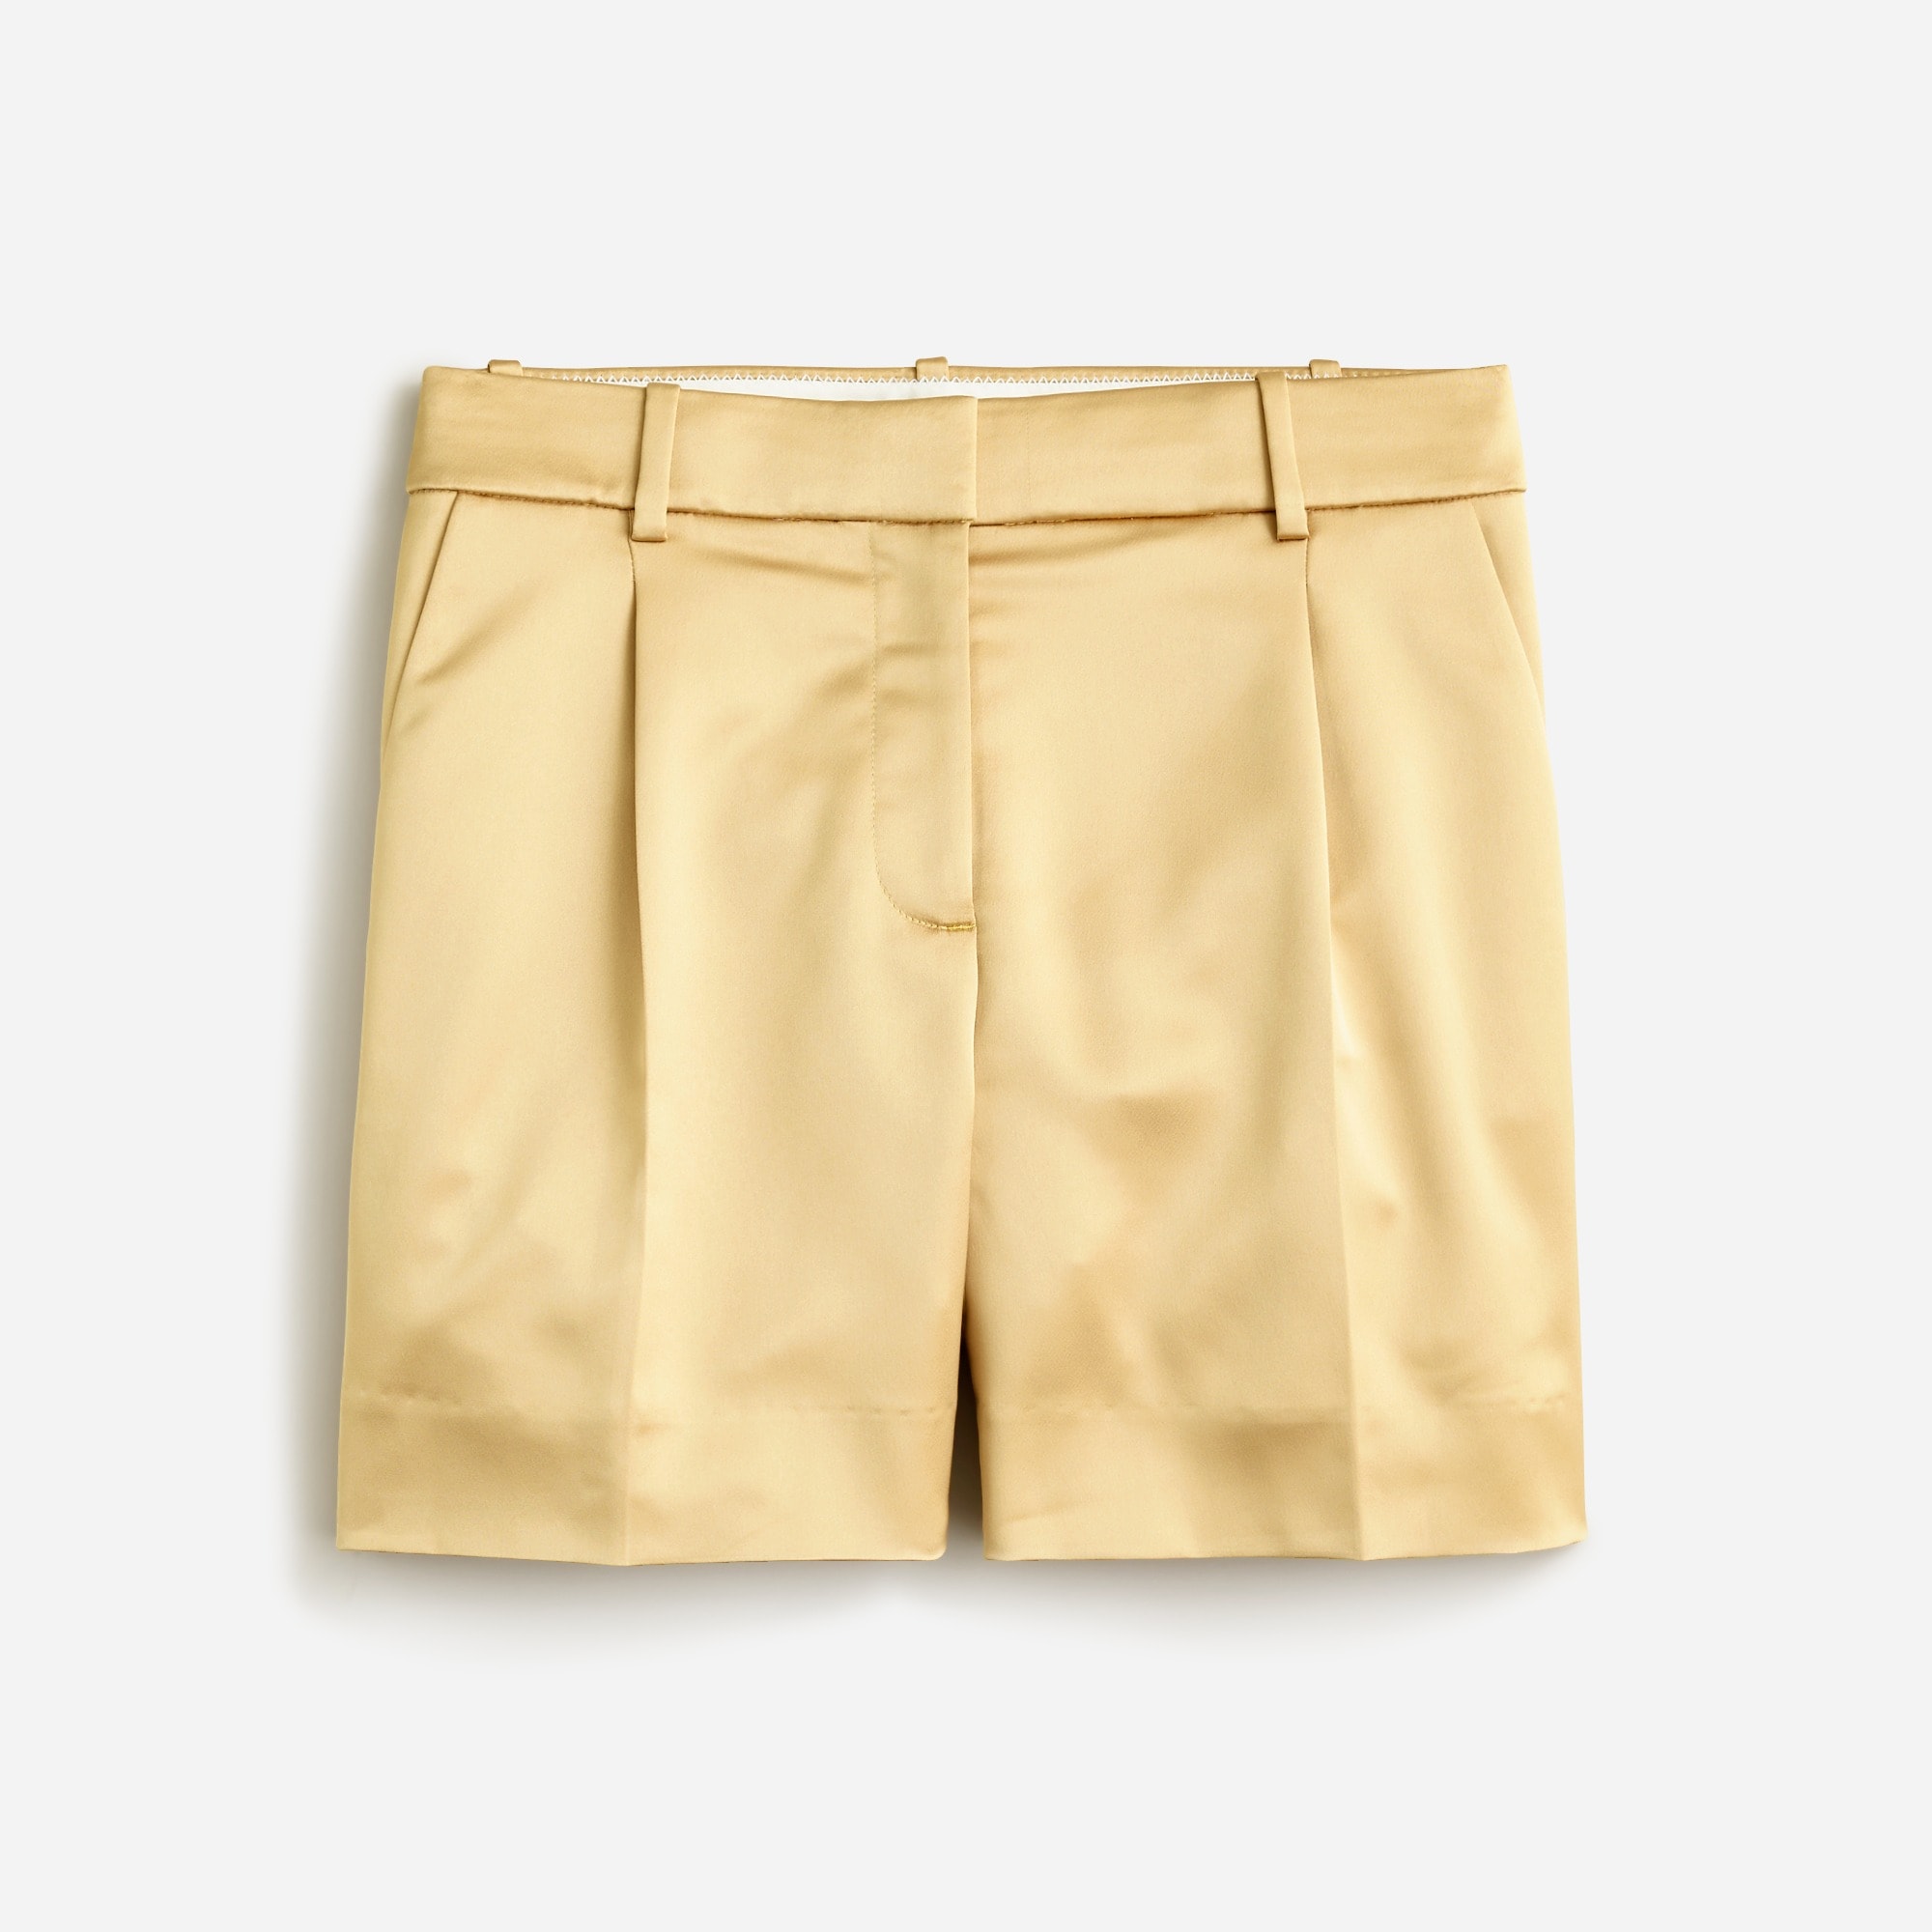  Pleated suit short in tailored satin